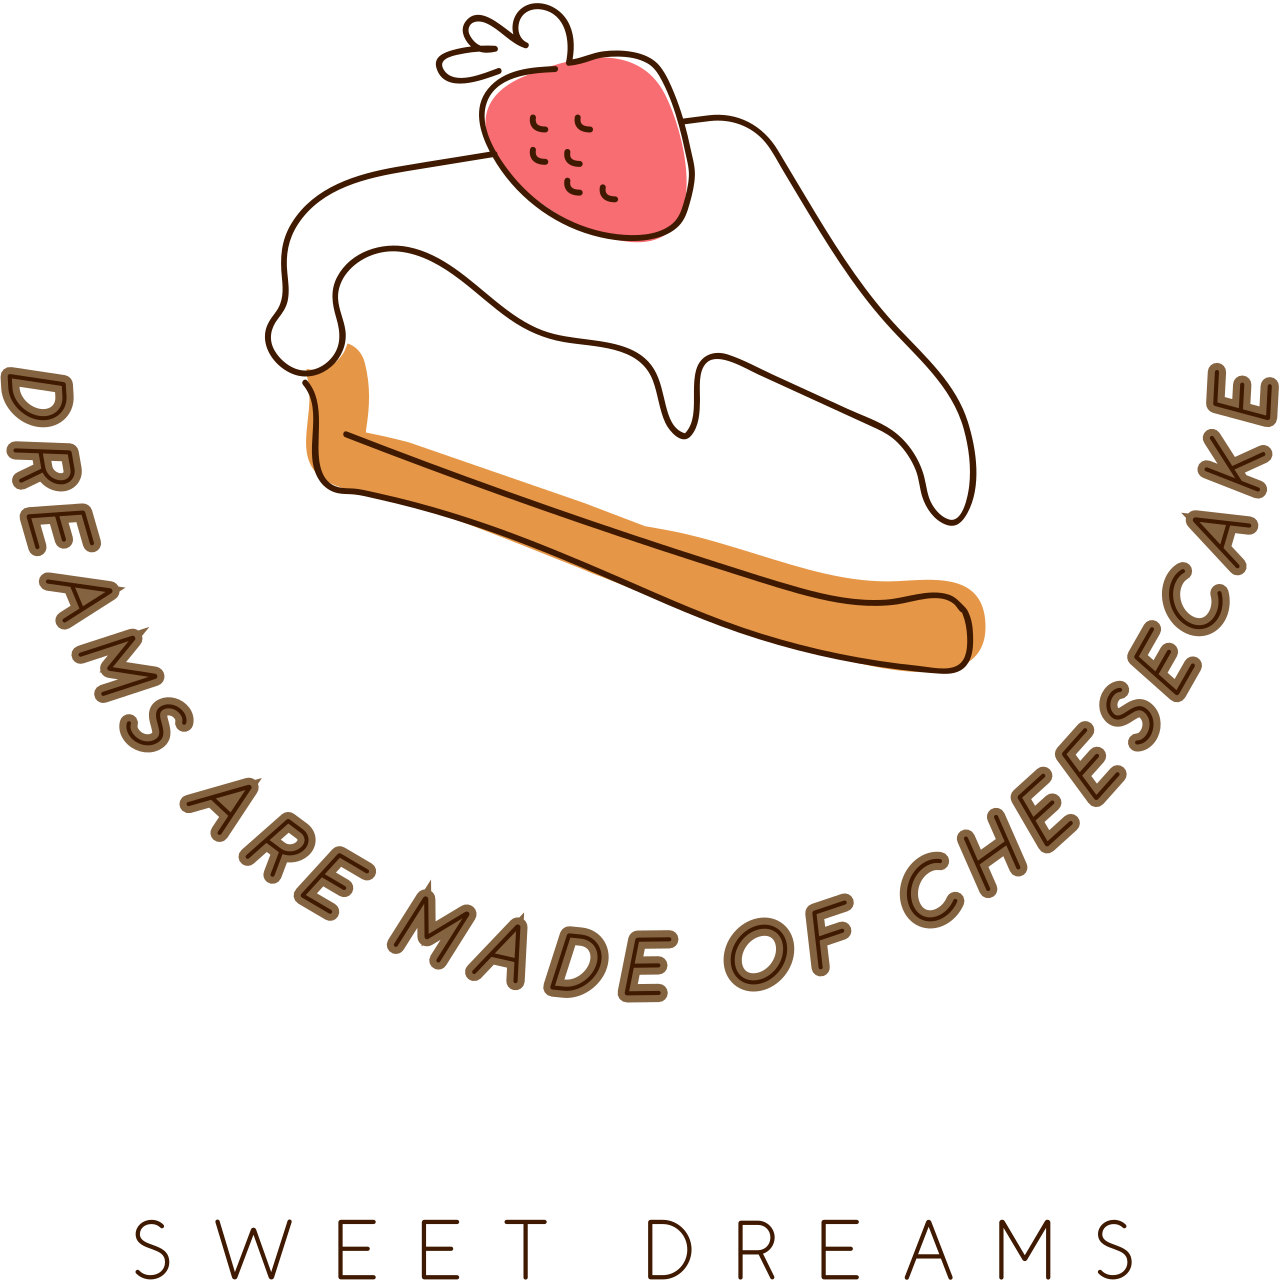 DREAMS ARE MADE OF CHEESECAKE's logo